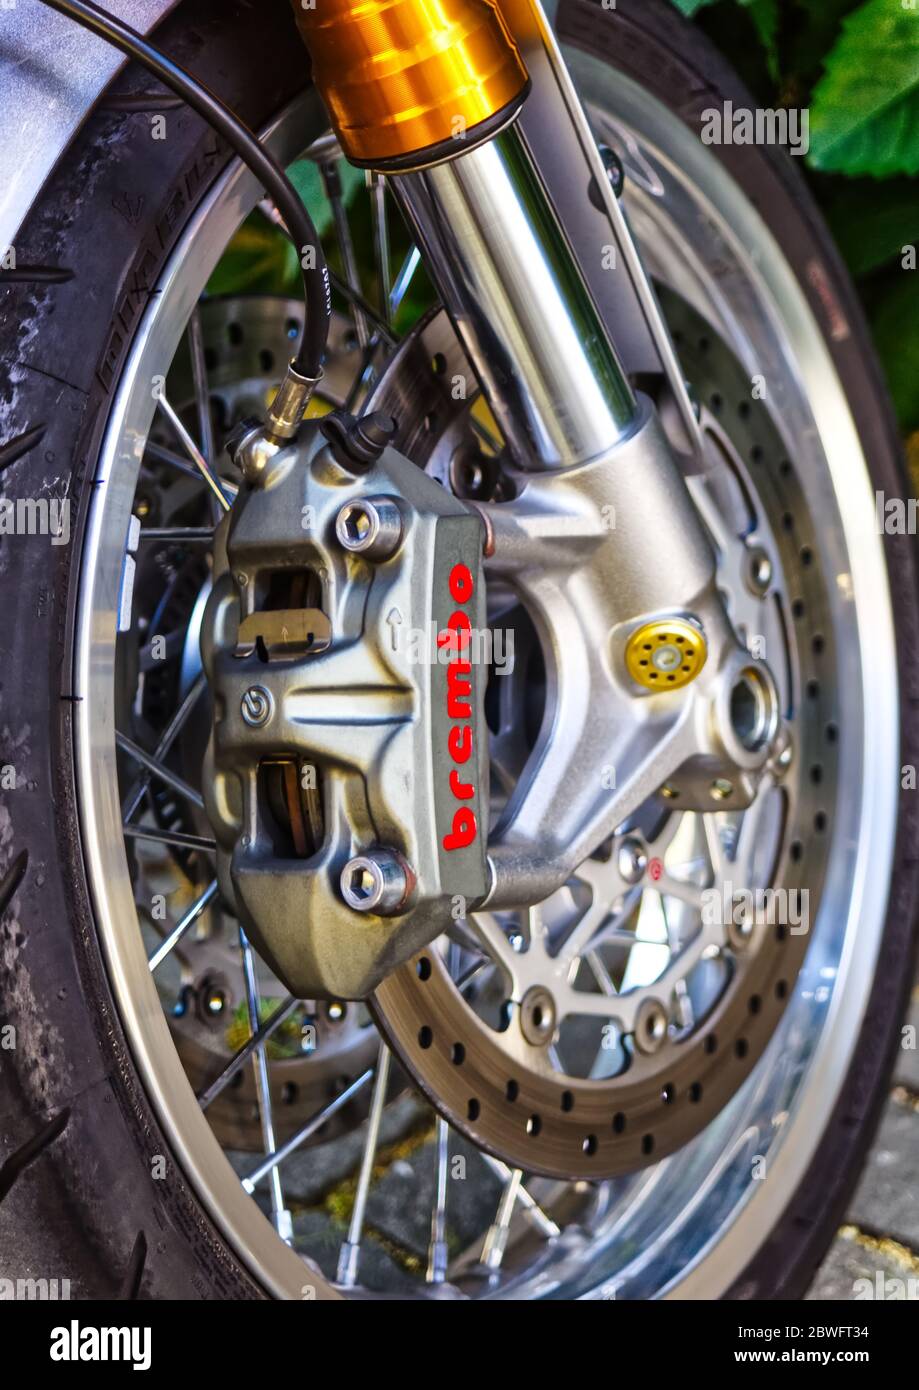 Brakes and wheel from a motorcycle Stock Photo